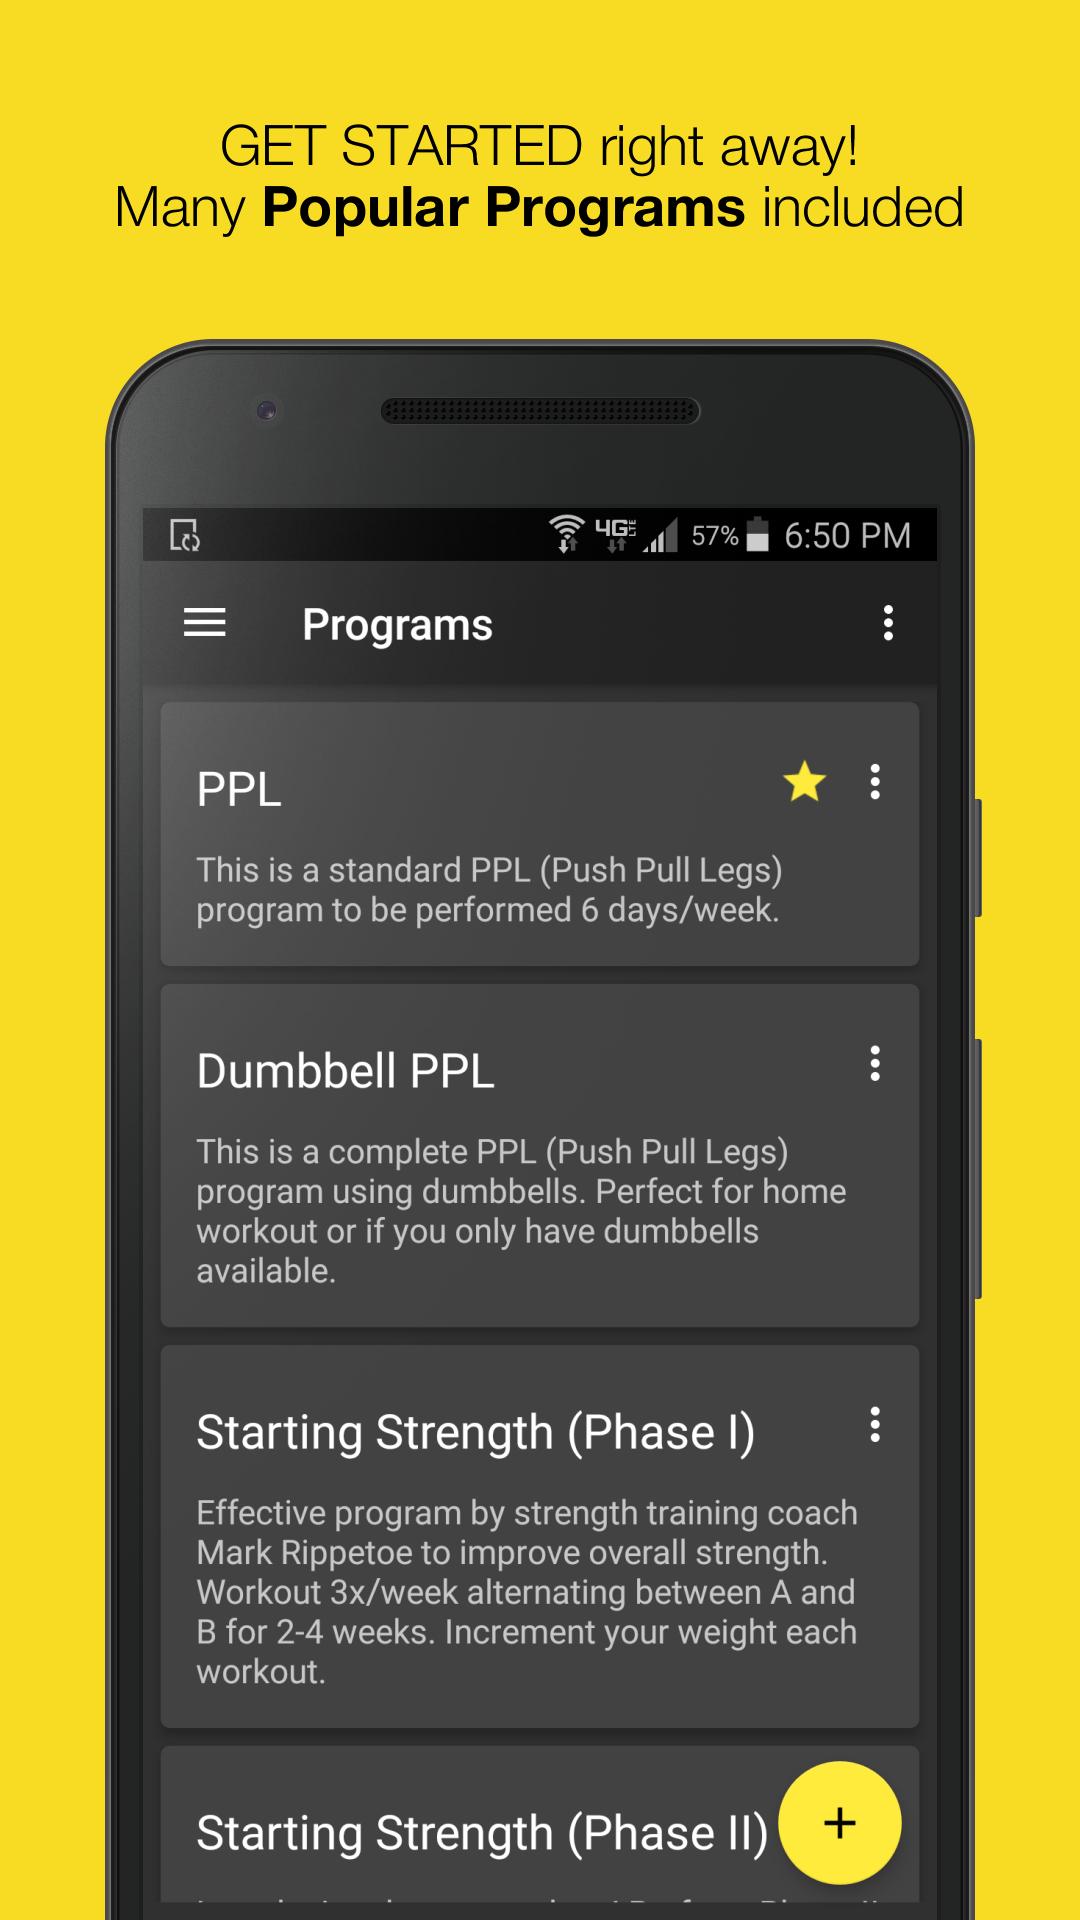 Simple Mytraining Workout Tracker Log Android for Fat Body